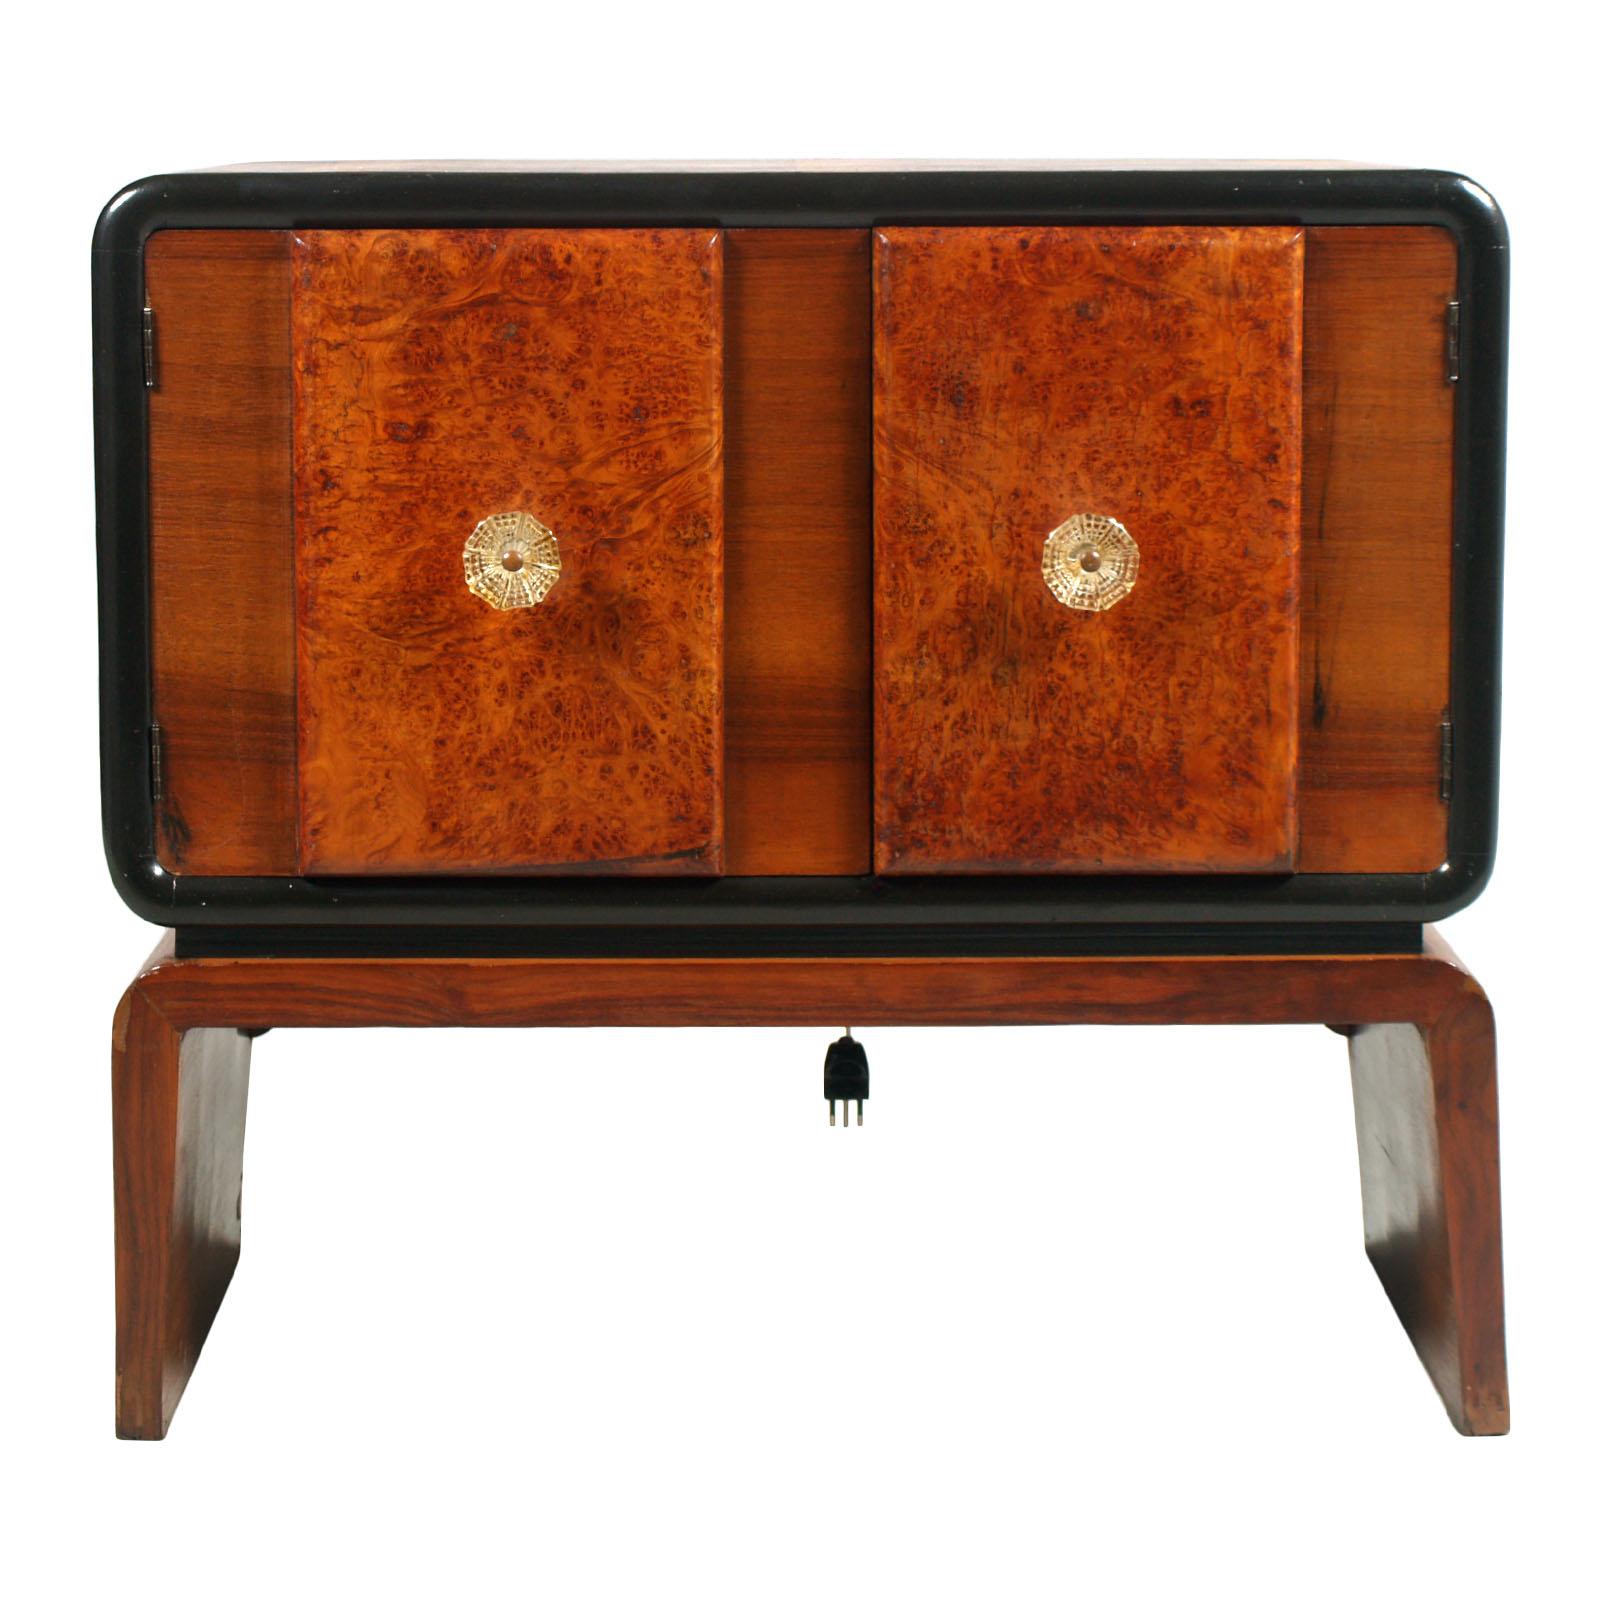 Art Deco bar cabinet in burl walnut, Guglielmo Urlich attributed for Meroni & Fossati , Lissone-Milano . All original cabinet restored, with functioning internal lighting. The internal mirror, has parts of small mirrors oxidized, that we thought not